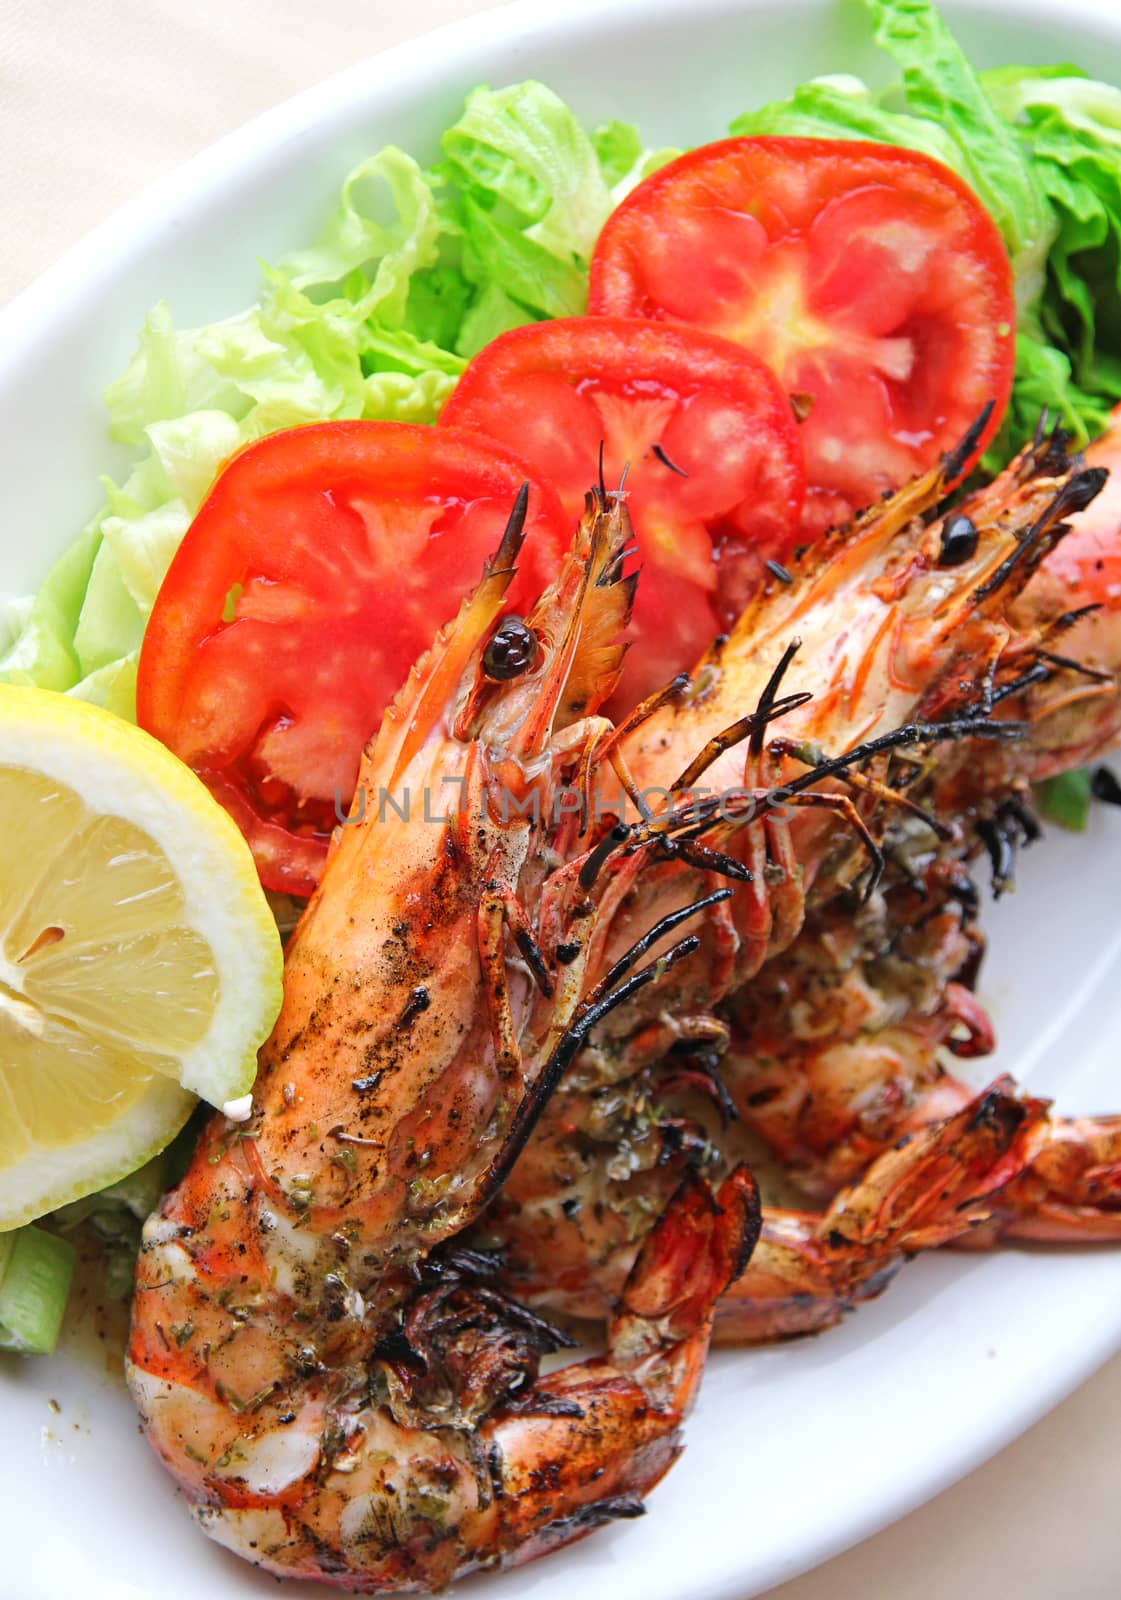 Fresh grilled shrimps with tomatoes, green salad and lemon on white plate 